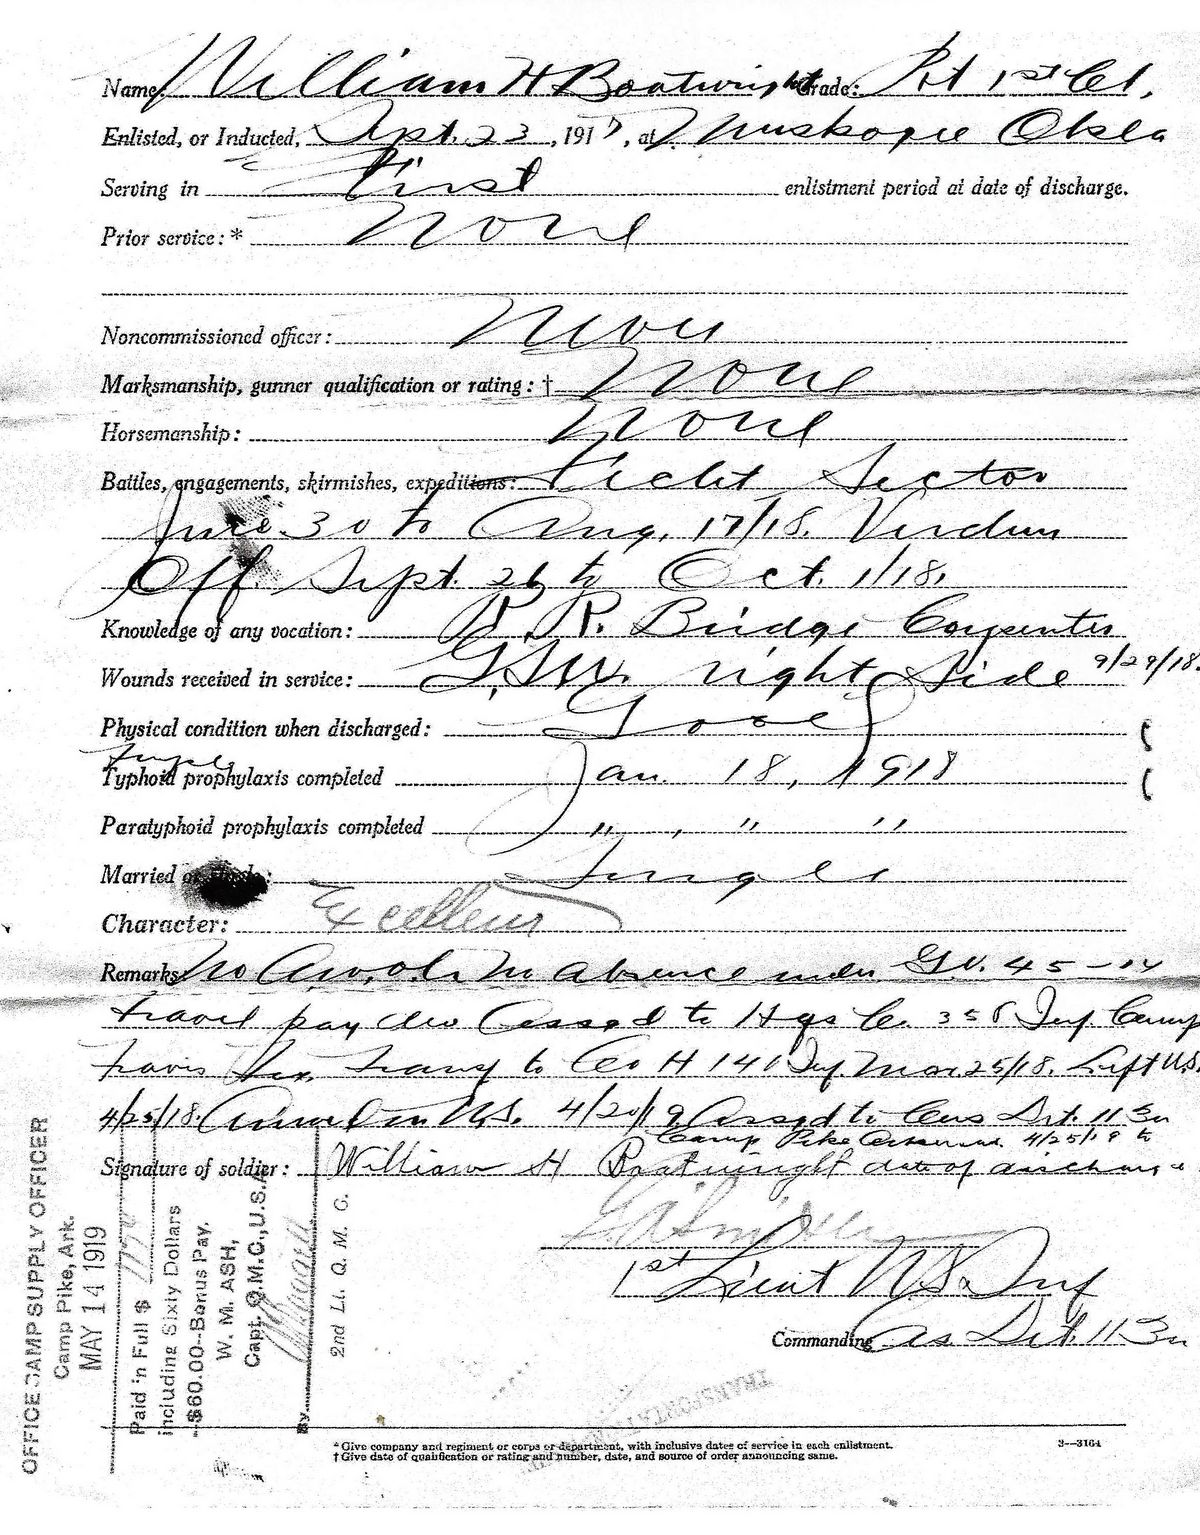 William Henry Harrison Boatwright World War 1 Discharge Papers: